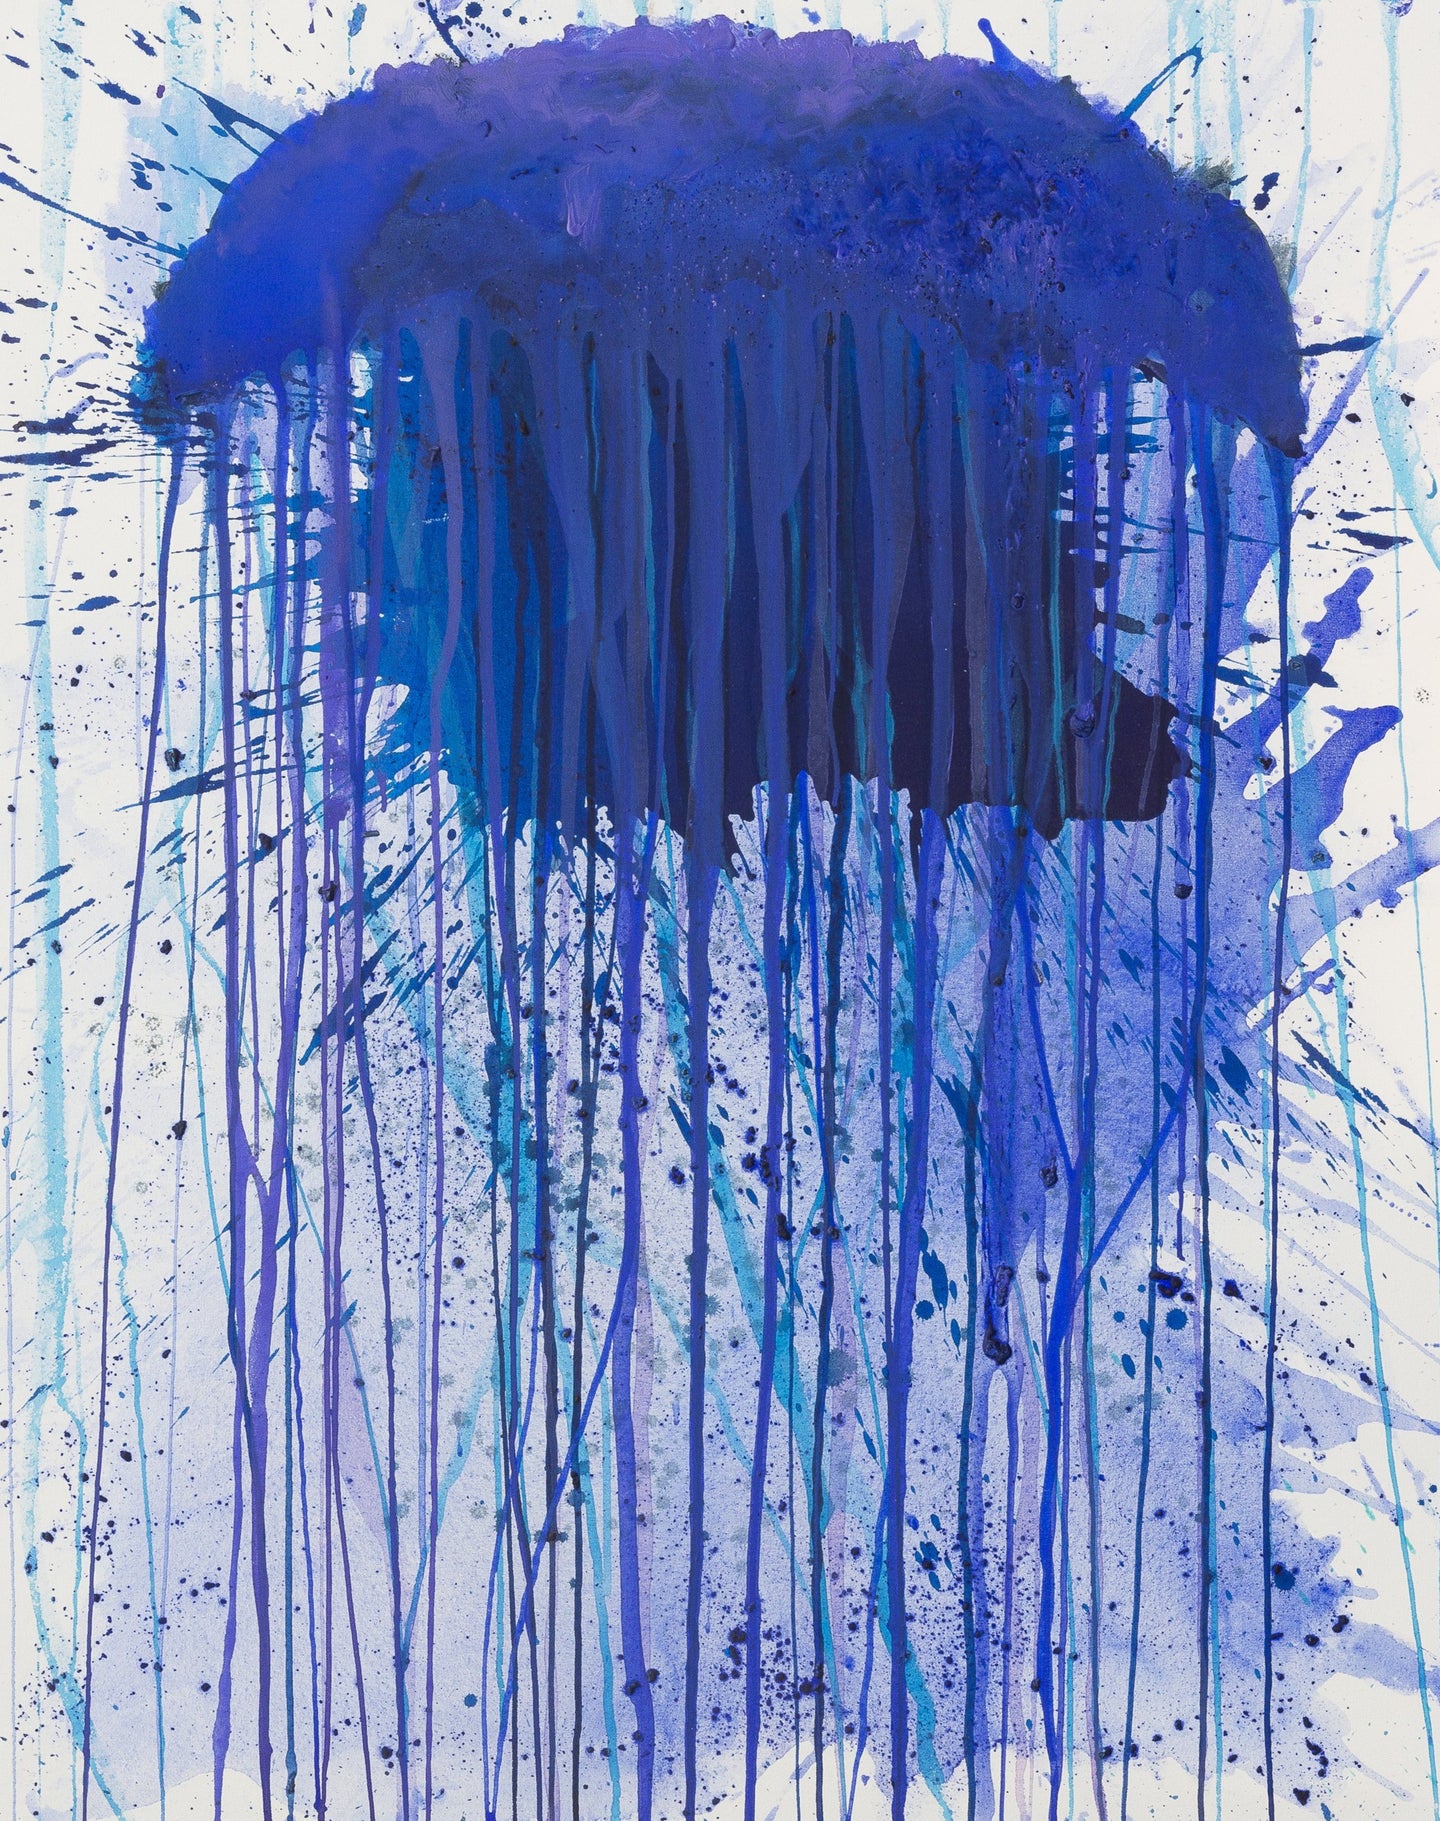 J. Steven Manolis, Jellyfish, 2015.01, Acrylic painting on canvas, 60 x 40 inches, Jellyfish painting, Abstract expressionism art for sale at Manolis Projects Art Gallery, Miami, Fl